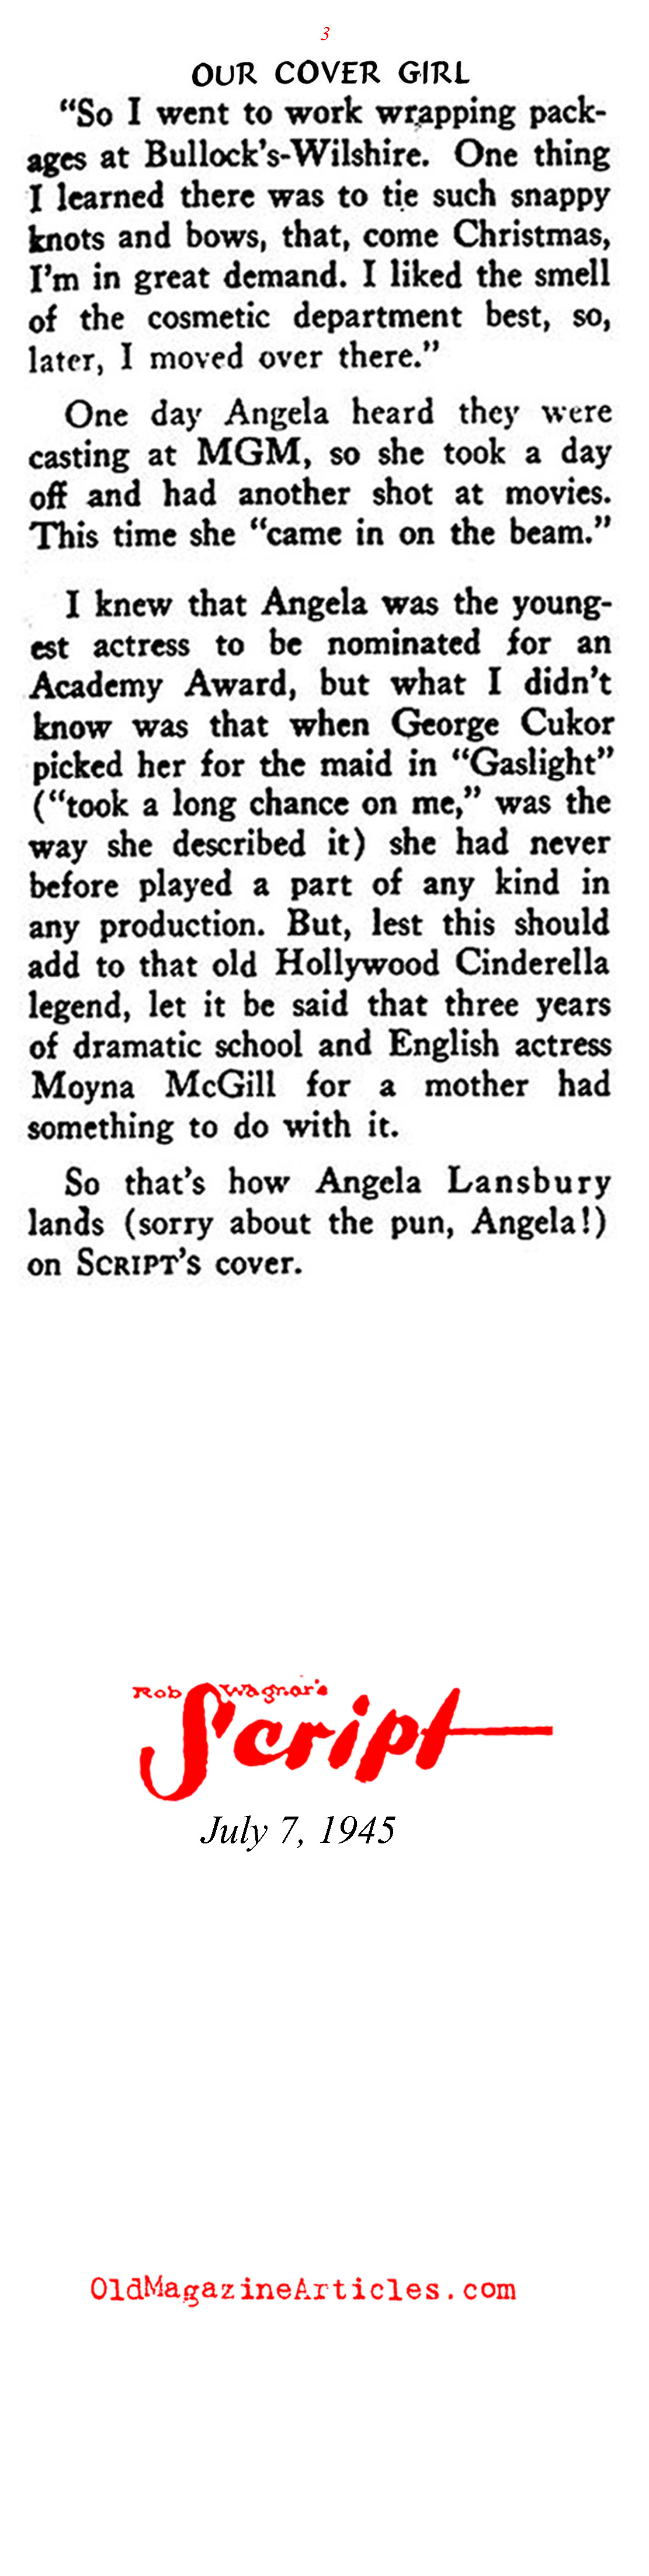 Angela Lansbury Arrives in Hollywood (Rob Wagner's Script, 1945)